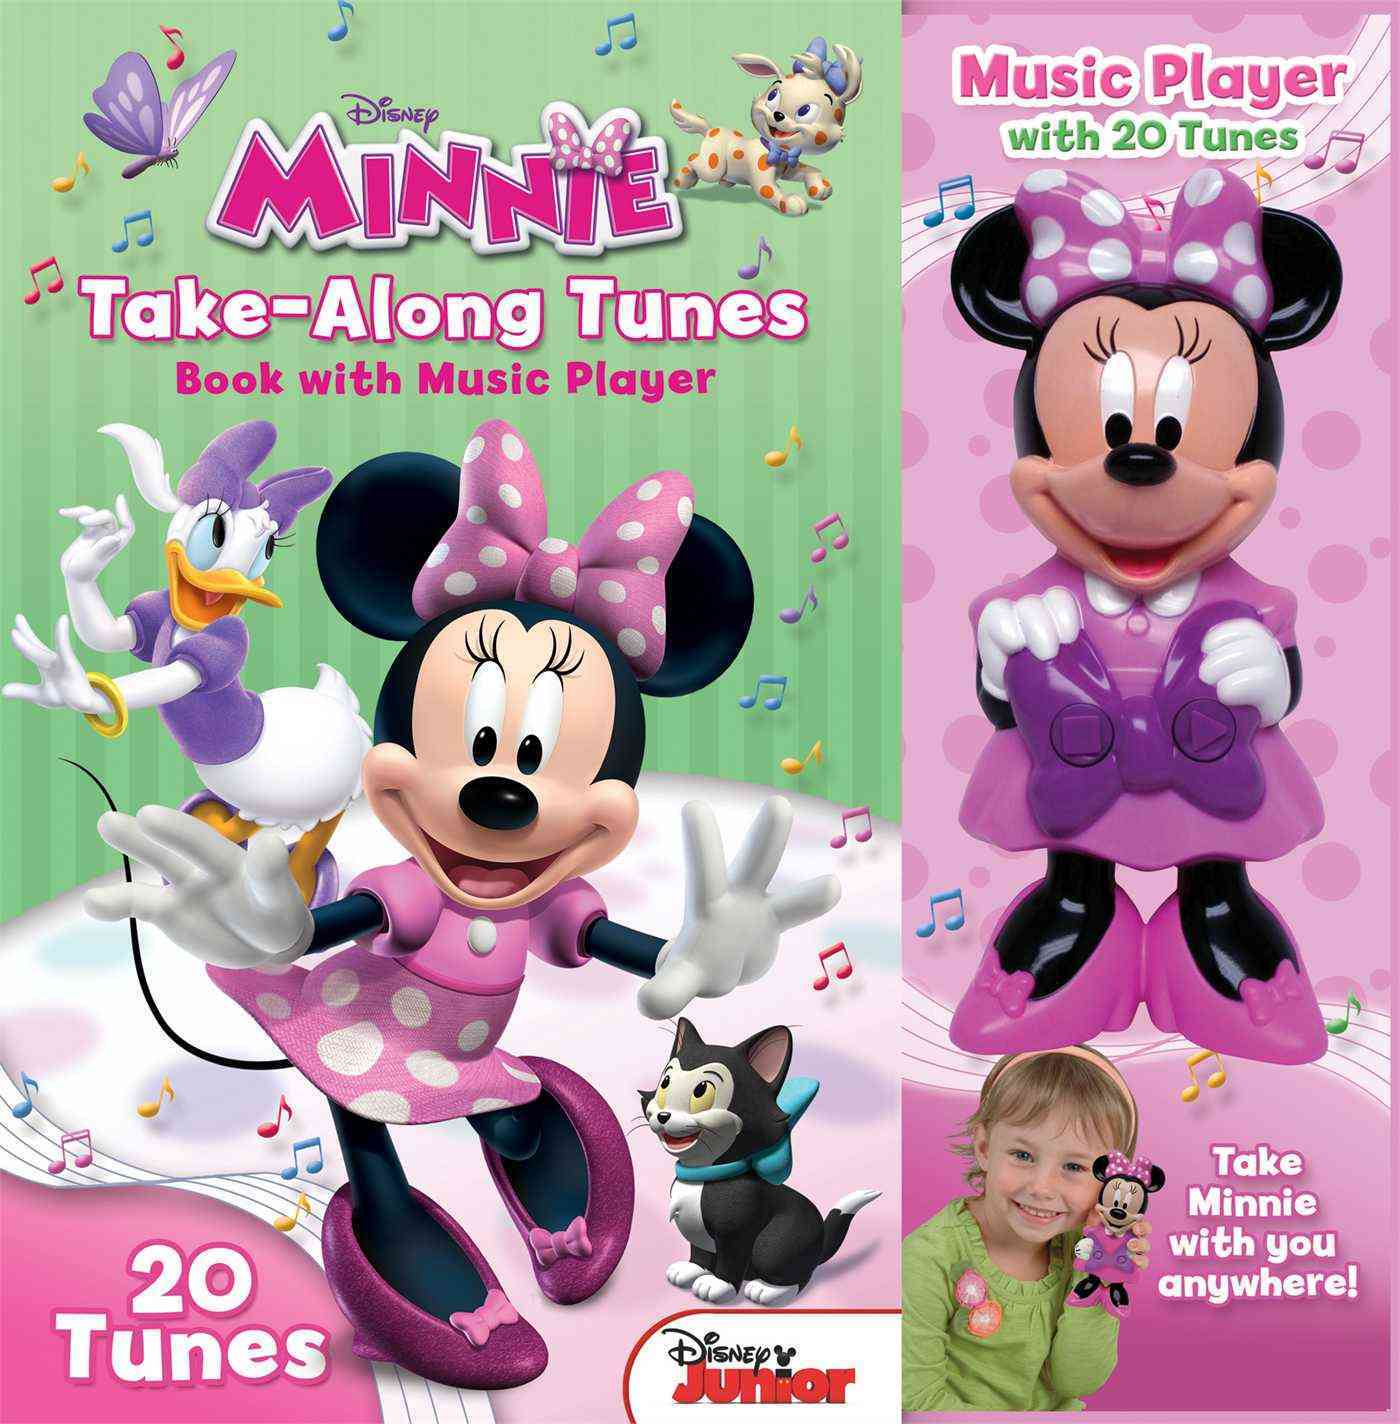 Disney Minnie Mouse Bow tique Take Along Tunes (Hardcover)  